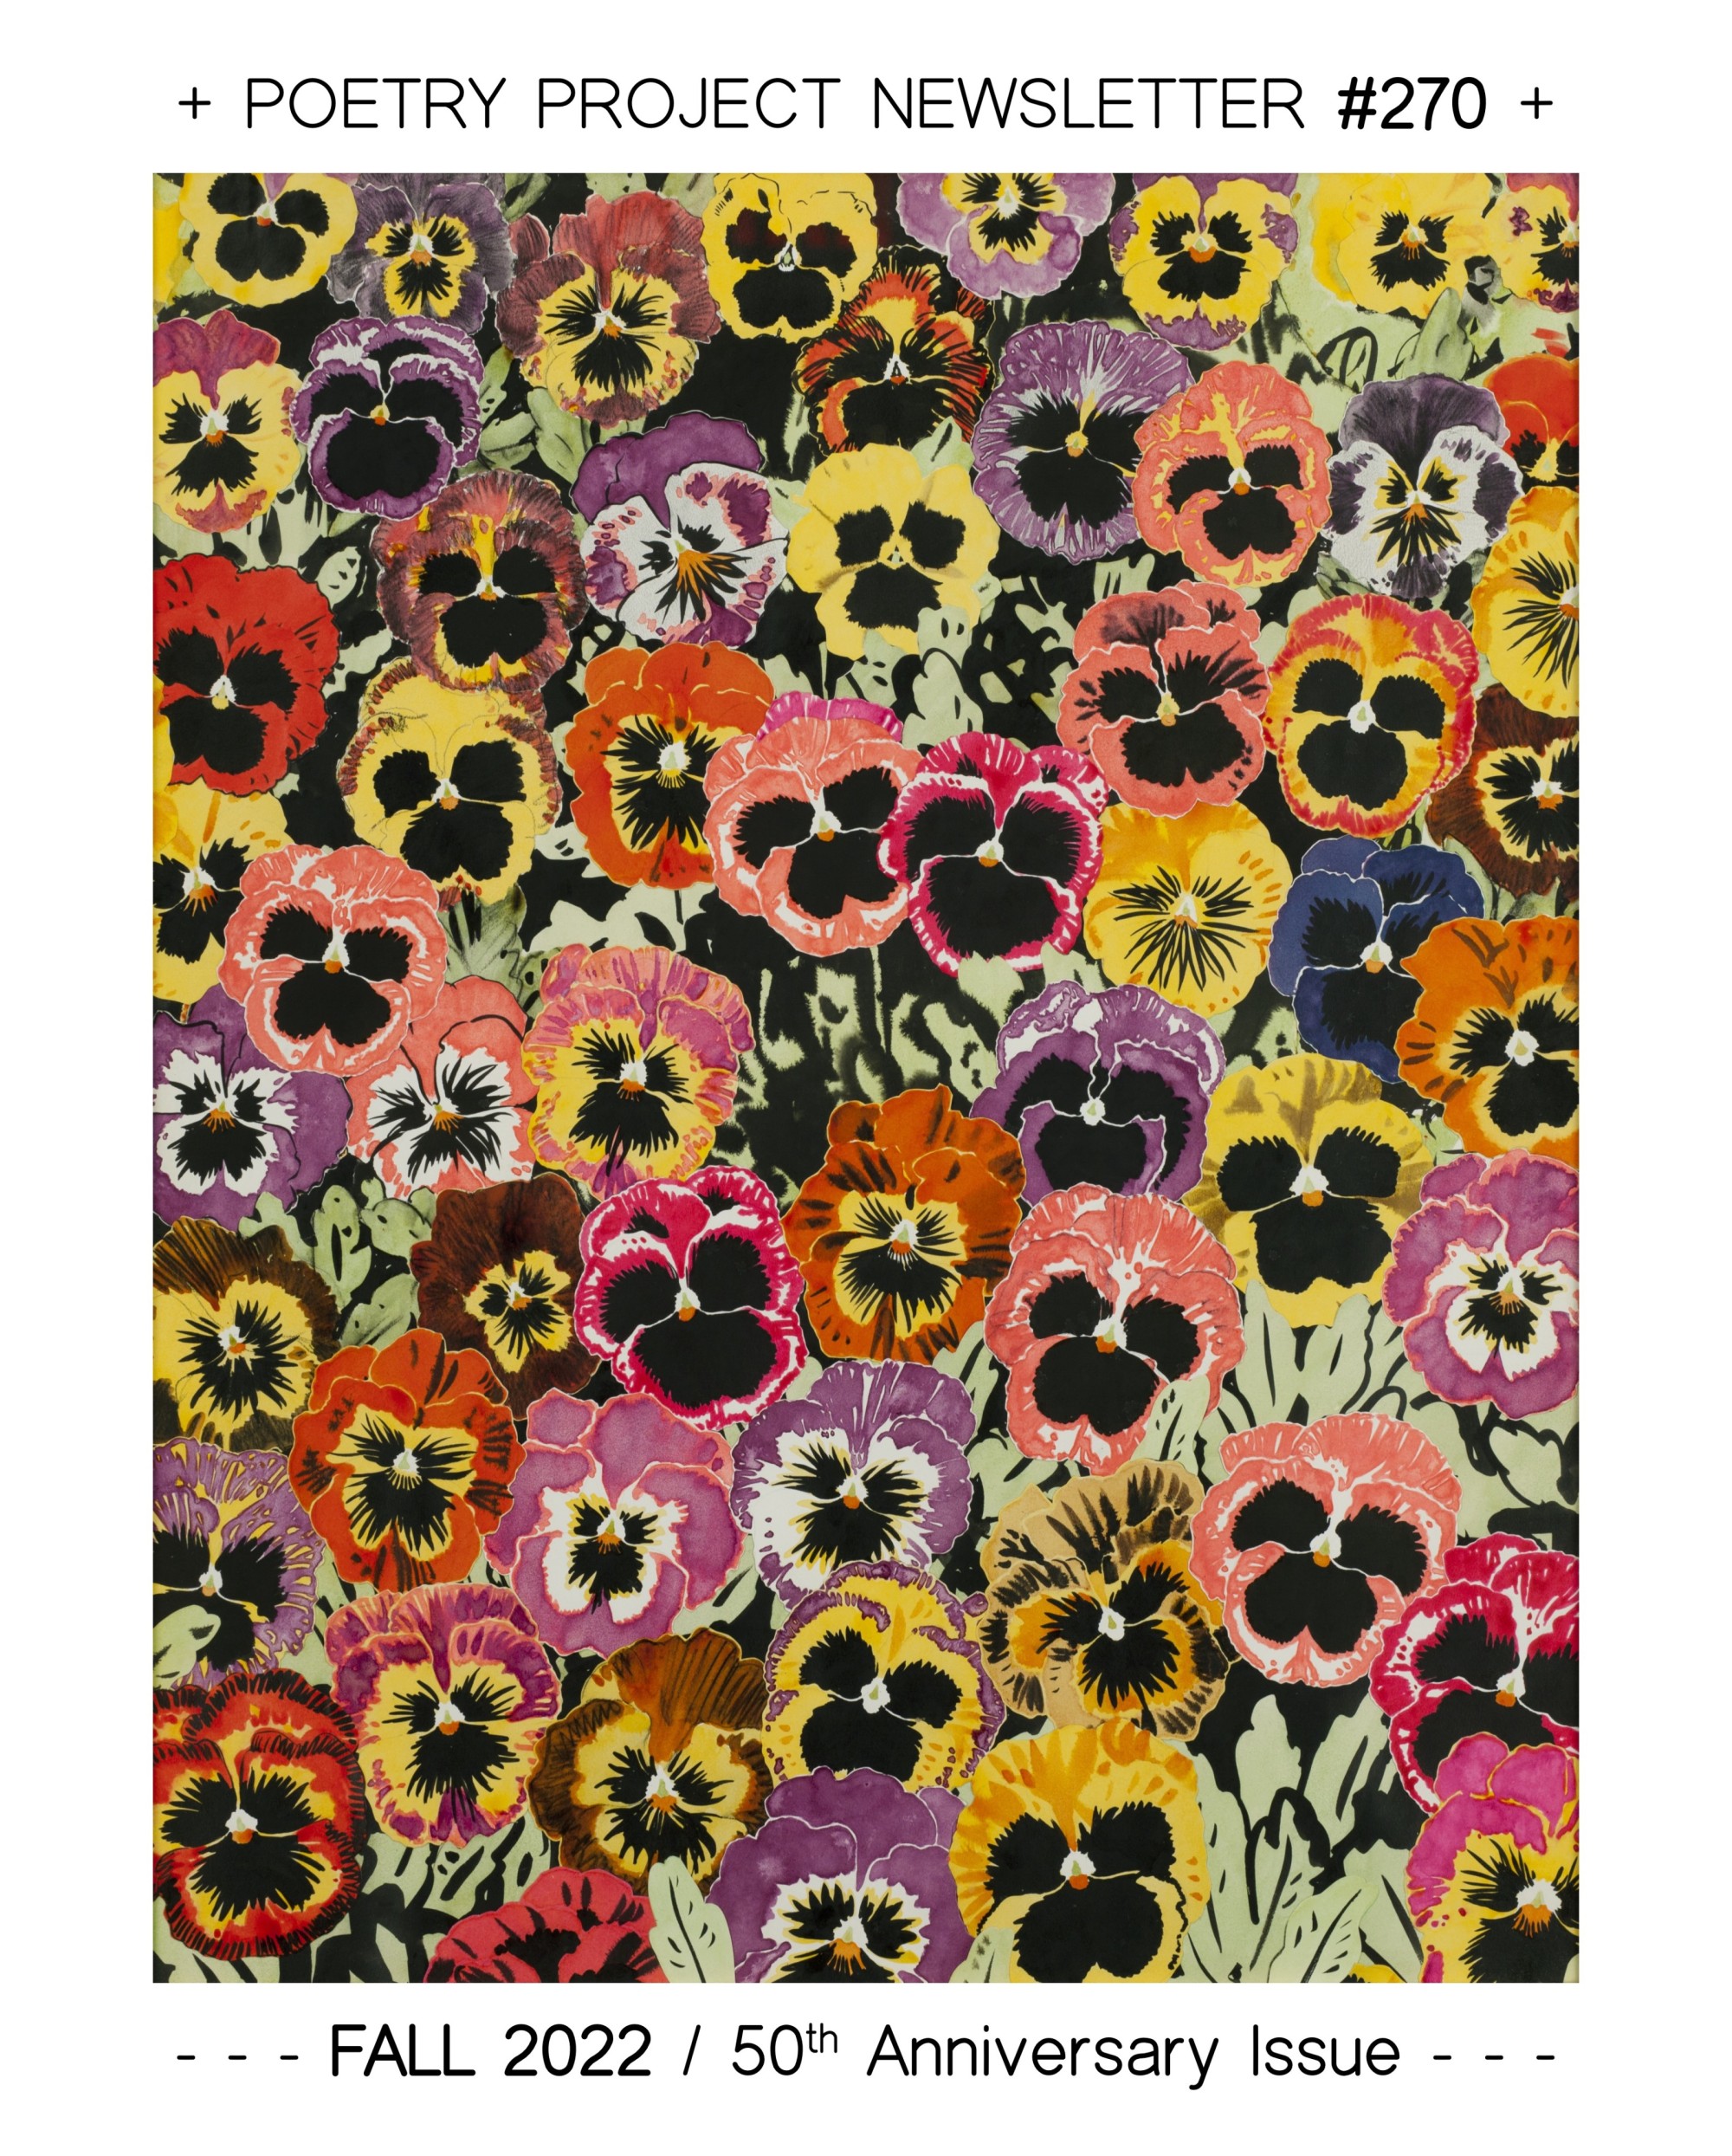 Joe Brainard's Pansies is an overflowing collage of cut out pansies. Though there are many colors of pansies, they all tend towards a kind of burning depth. The presence of black toward the center of the petals is notable—most form a pattern of two marks on top, one mark on bottom, producing almost confrontational, face-like encounters.